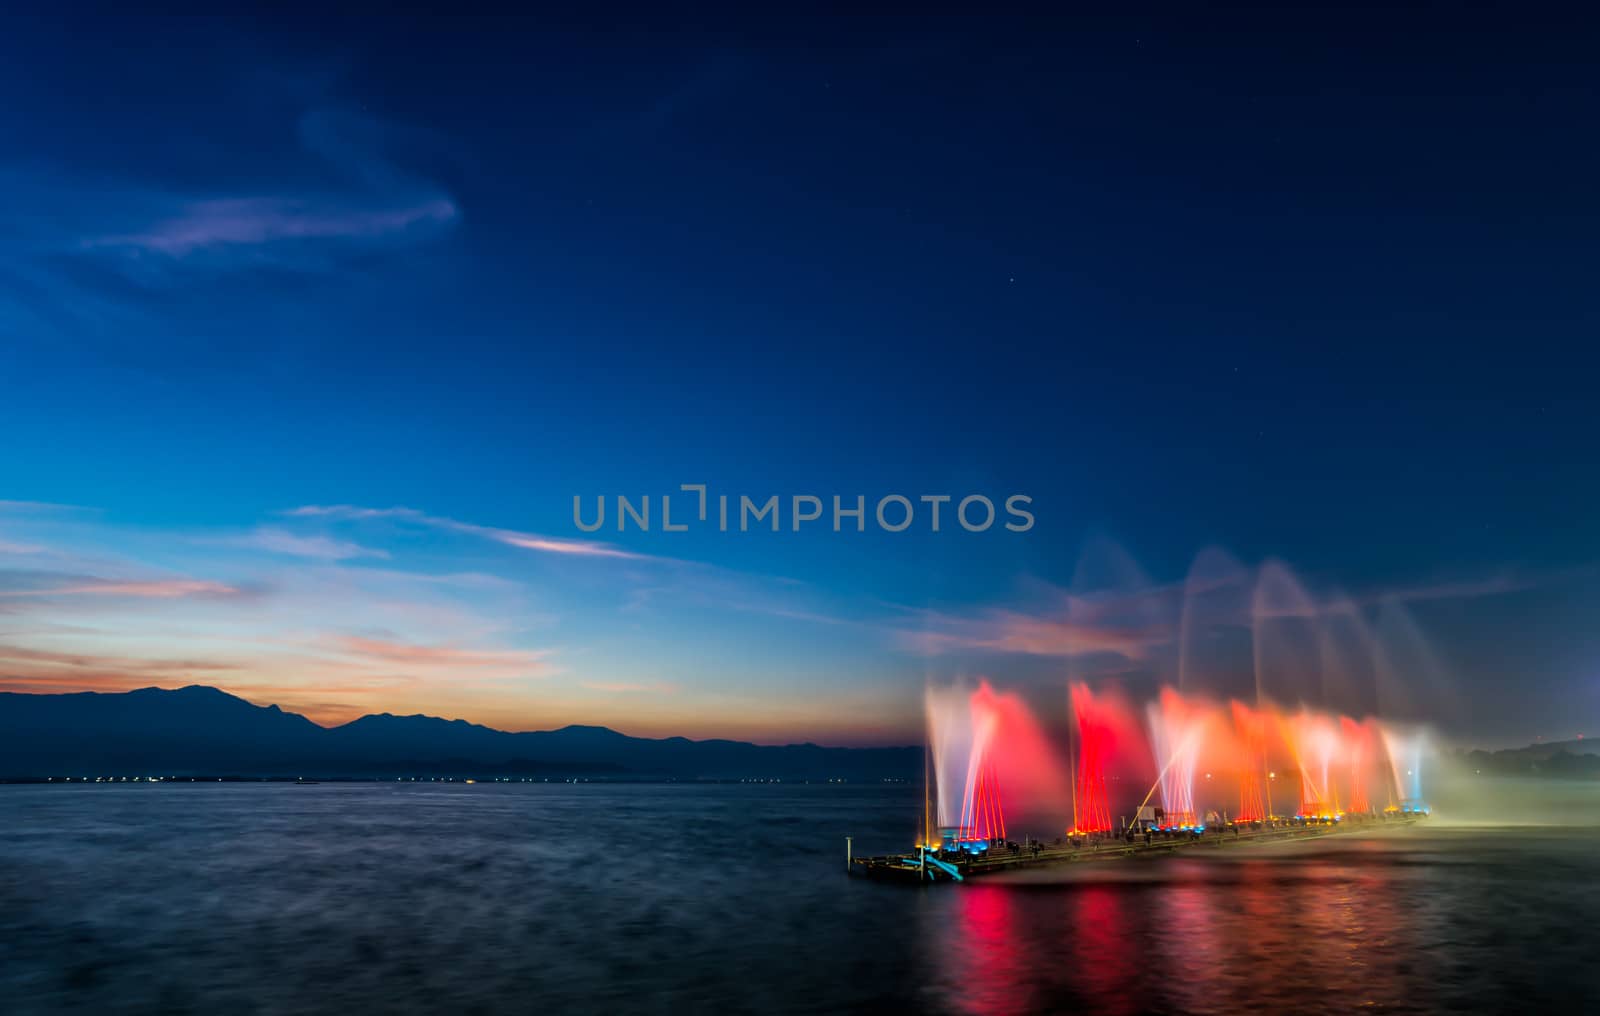 fountain on water in twilight time by moggara12